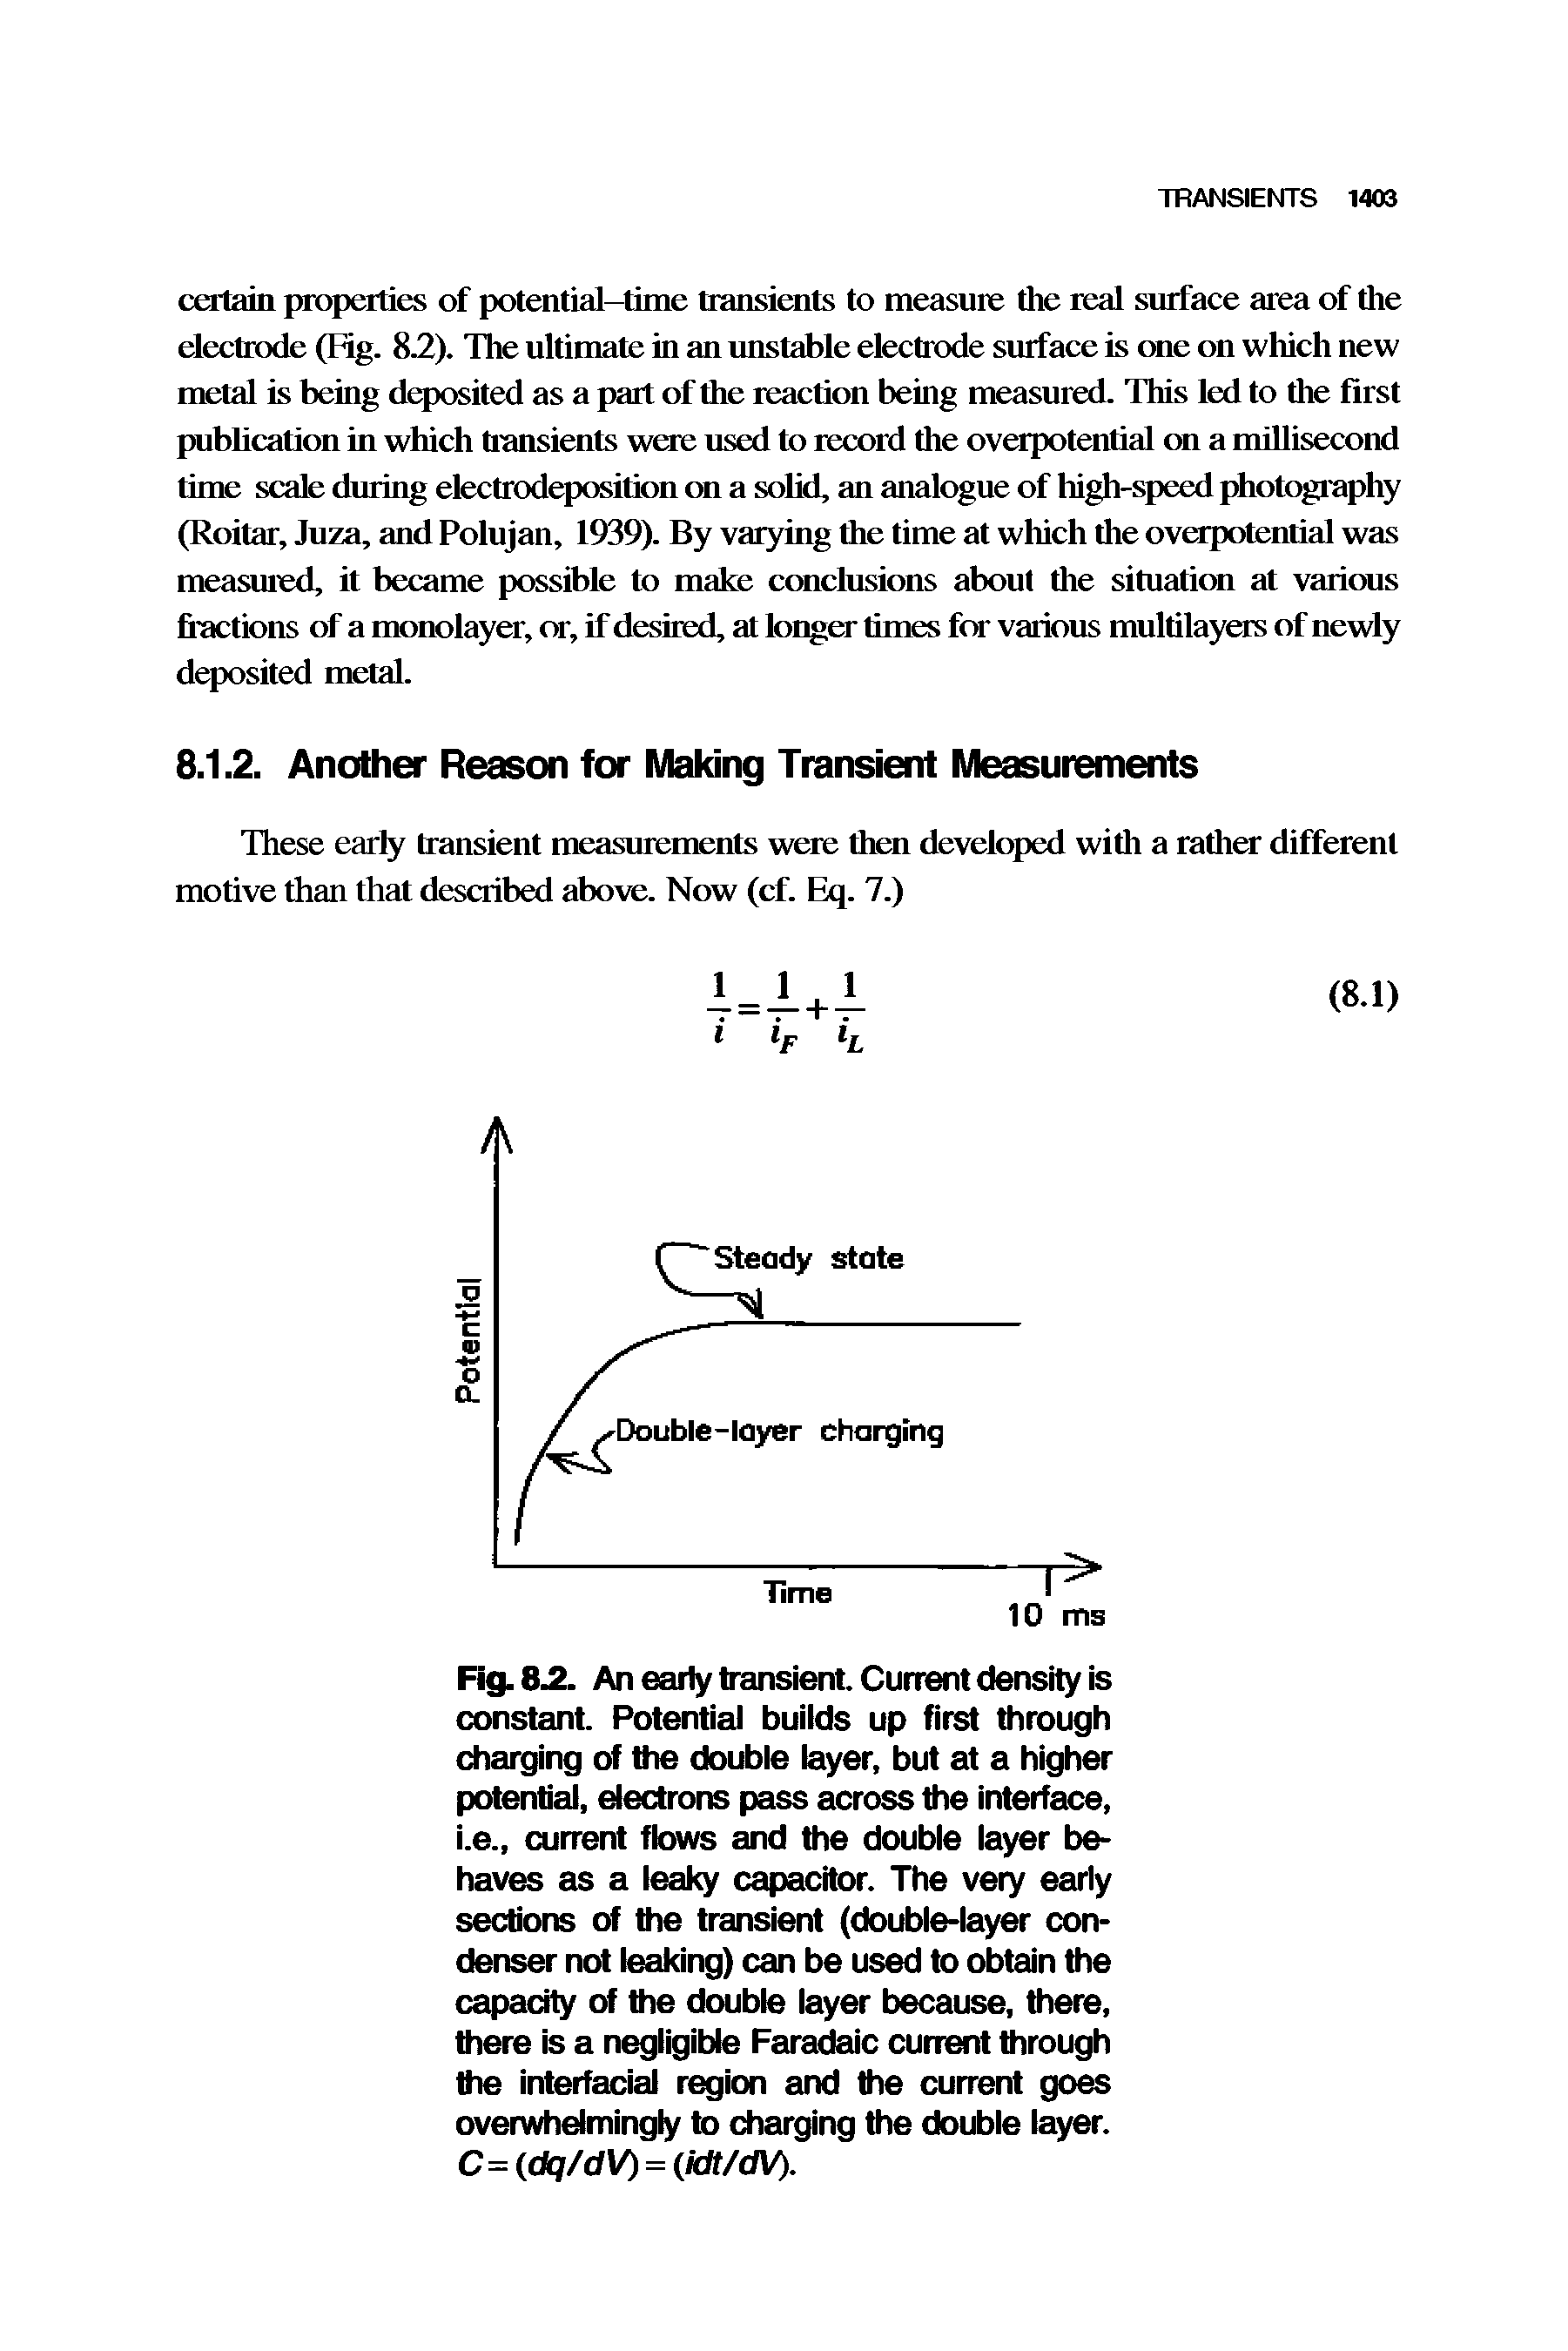 Fig. 8.2. An early transient. Current density is constant. Potential builds up first through charging of the double layer, but at a higher potential, electrons pass across the interface, i.e., current flows and the double layer behaves as a leaky capacitor. The very early sections of the transient (double-layer condenser not leaking) can be used to obtain the capacity of the double layer because, there, there is a negligible Faradaic current through the interfacial region and the current goes overwhelmingly to charging the double layer. C = (dq/dV) = (idt/dV).